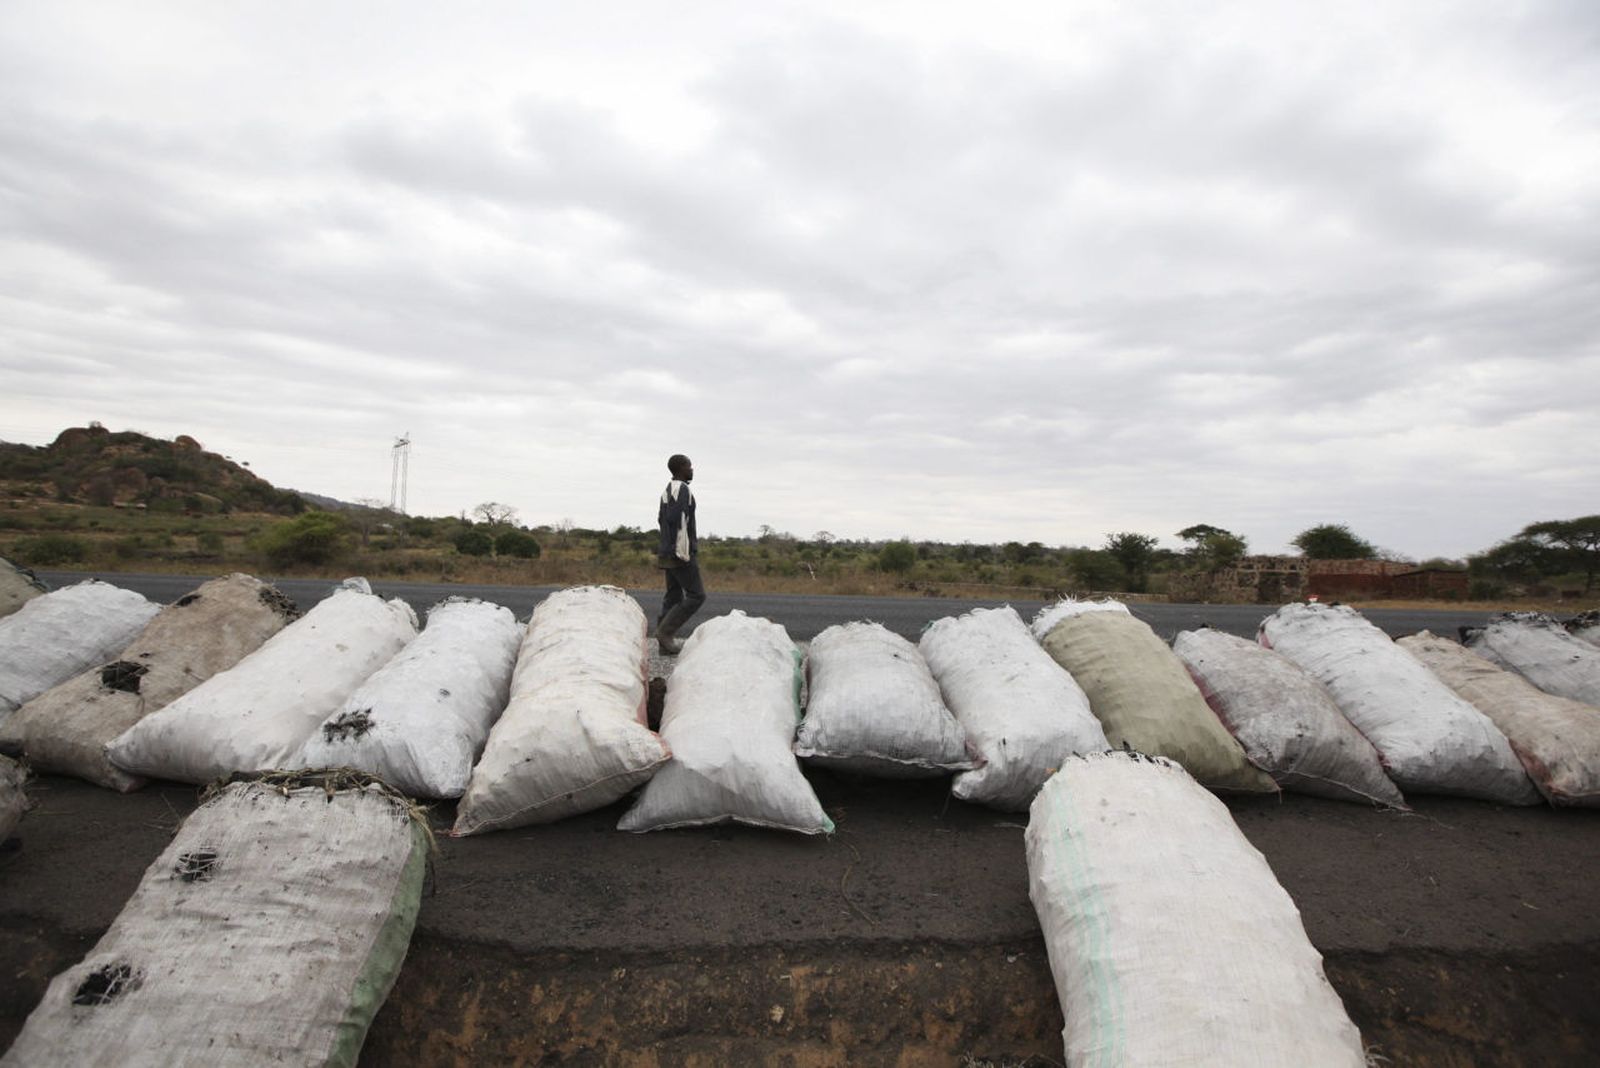 Charcoal bags ready for sale in rural Kenya.